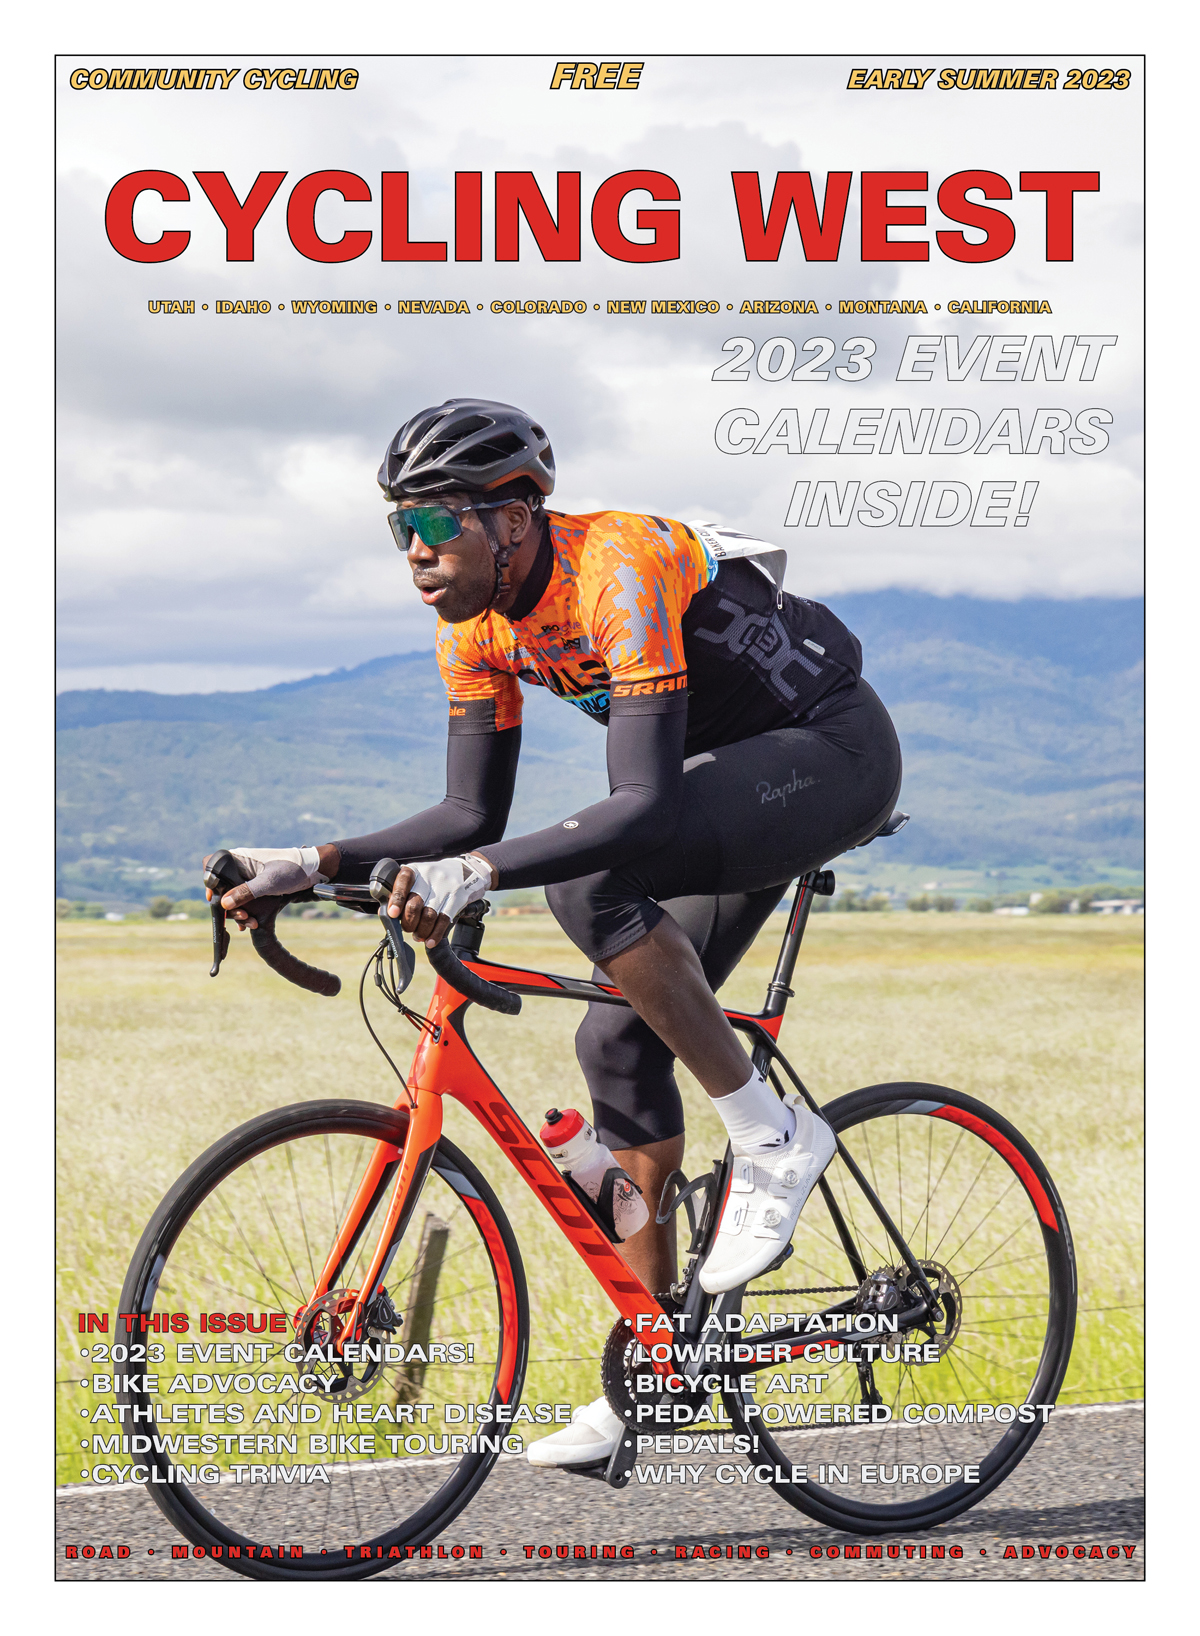 Cycling West Early Summer 2023 Cover Photo: Karl-Henry Dossous of the Dialed Cycling Team in the 2022 Baker City Cycling Classic time trial. Photo by Ddup Photos - David and Denise Ward, courtesy Baker City Cycling Classic